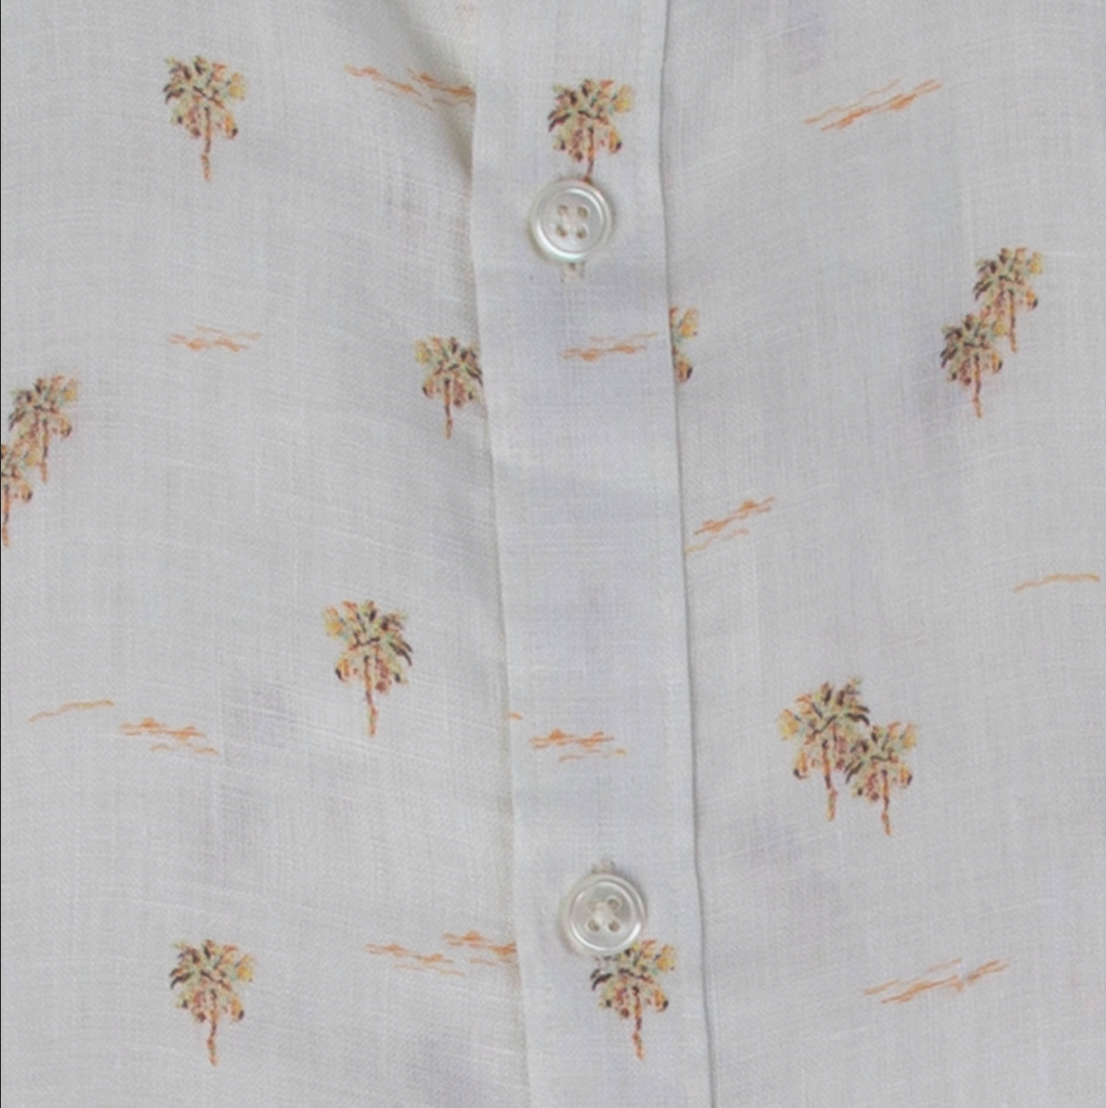 Stitch Note - Classic Collar Long Sleeve Button Up - Palm Tree